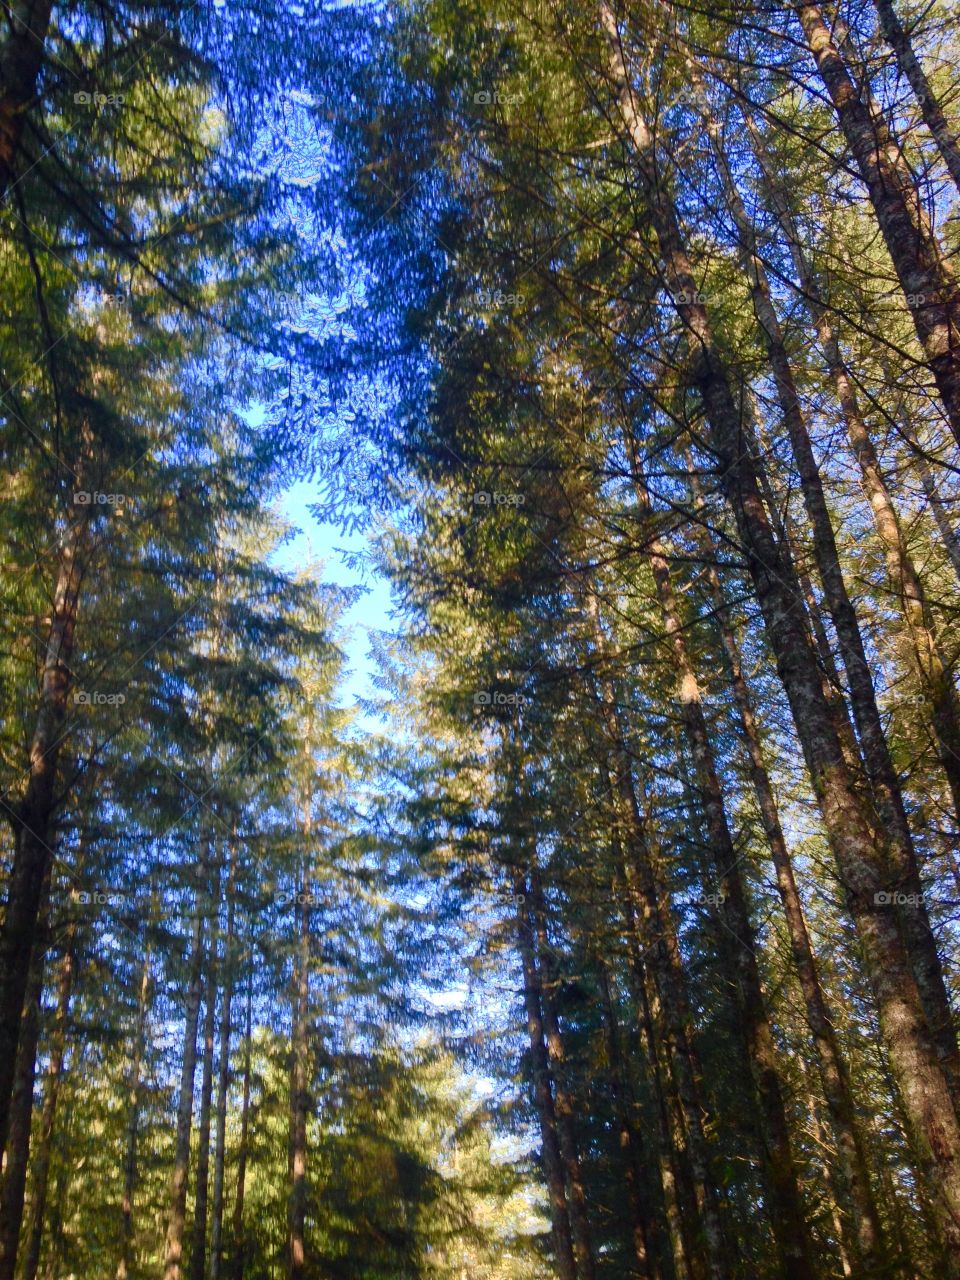 Let the sky in. Looking up thru trees in the forest 